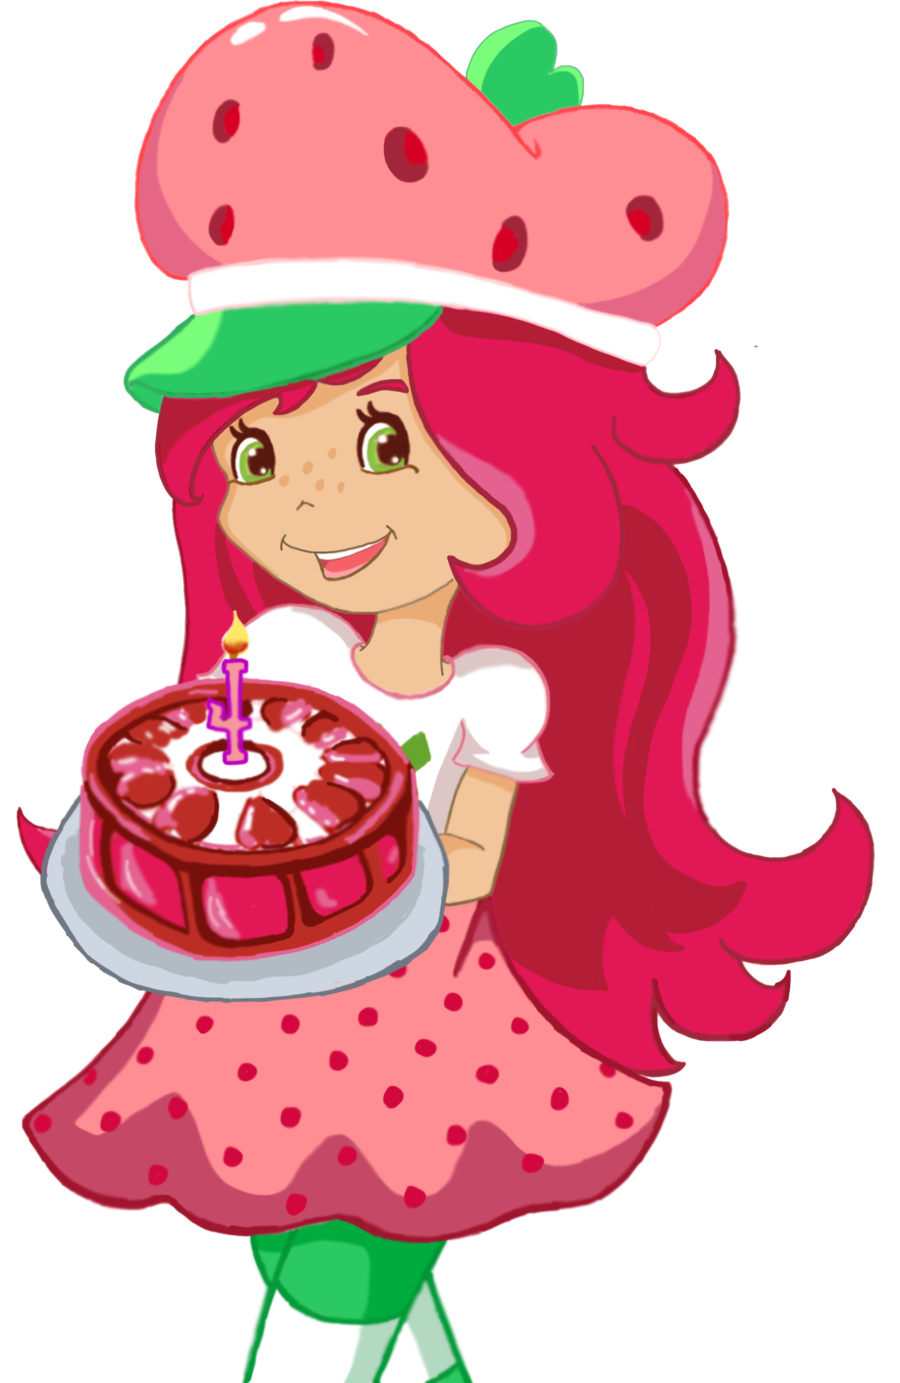 Cute strawberry good pink. Strawberries clipart four